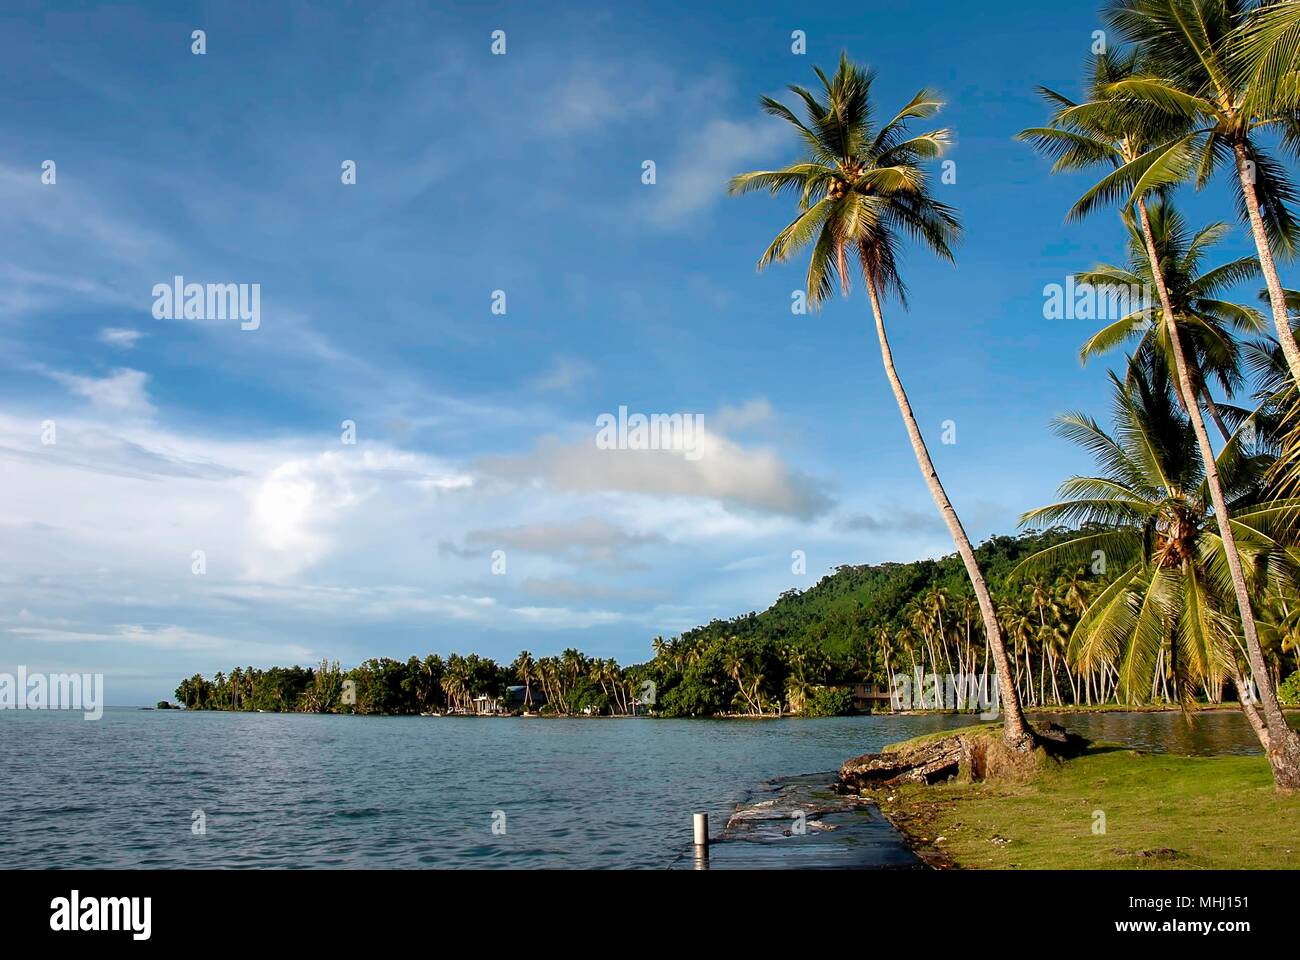 Caroline Islands High Resolution Stock Photography and Images - Alamy